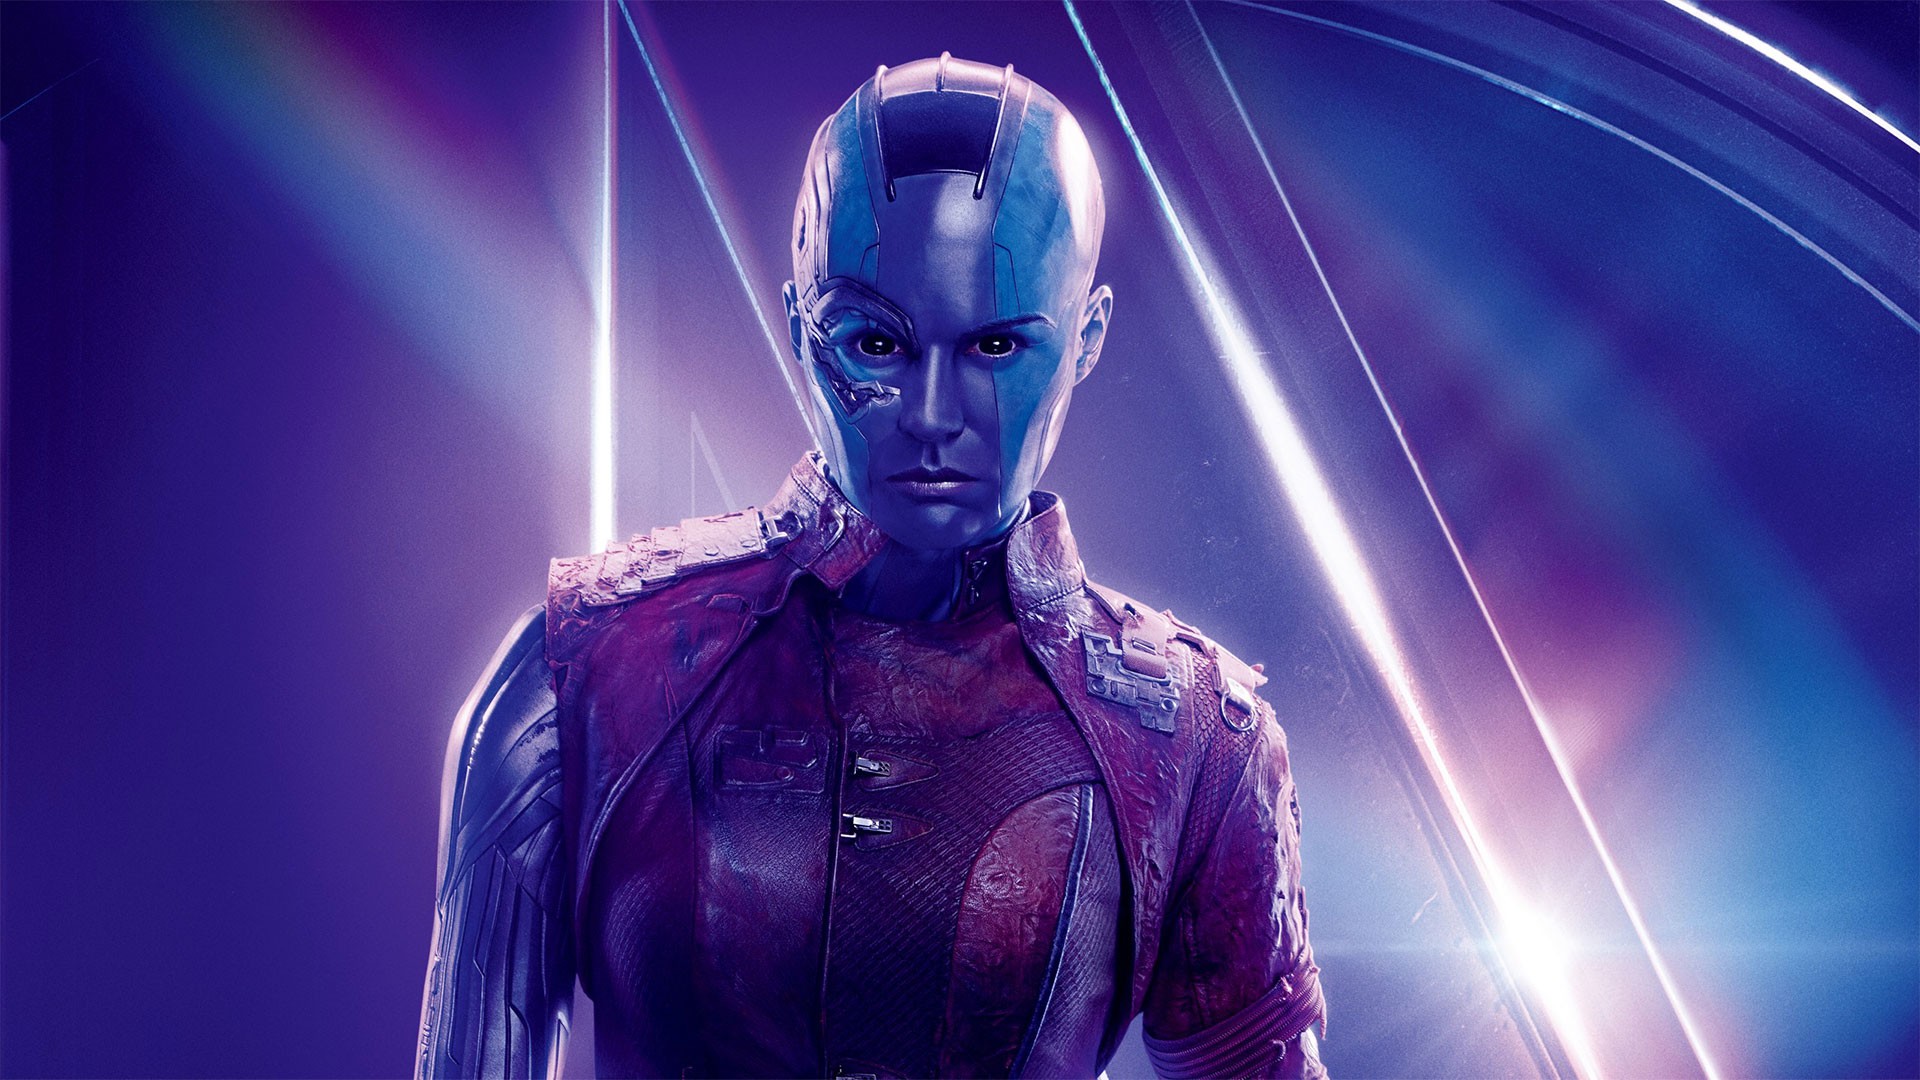 Karen Gillan Avengers Endgame Wallpaper HD with high-resolution 1920x1080 pixel. You can use this poster wallpaper for your Desktop Computers, Mac Screensavers, Windows Backgrounds, iPhone Wallpapers, Tablet or Android Lock screen and another Mobile device